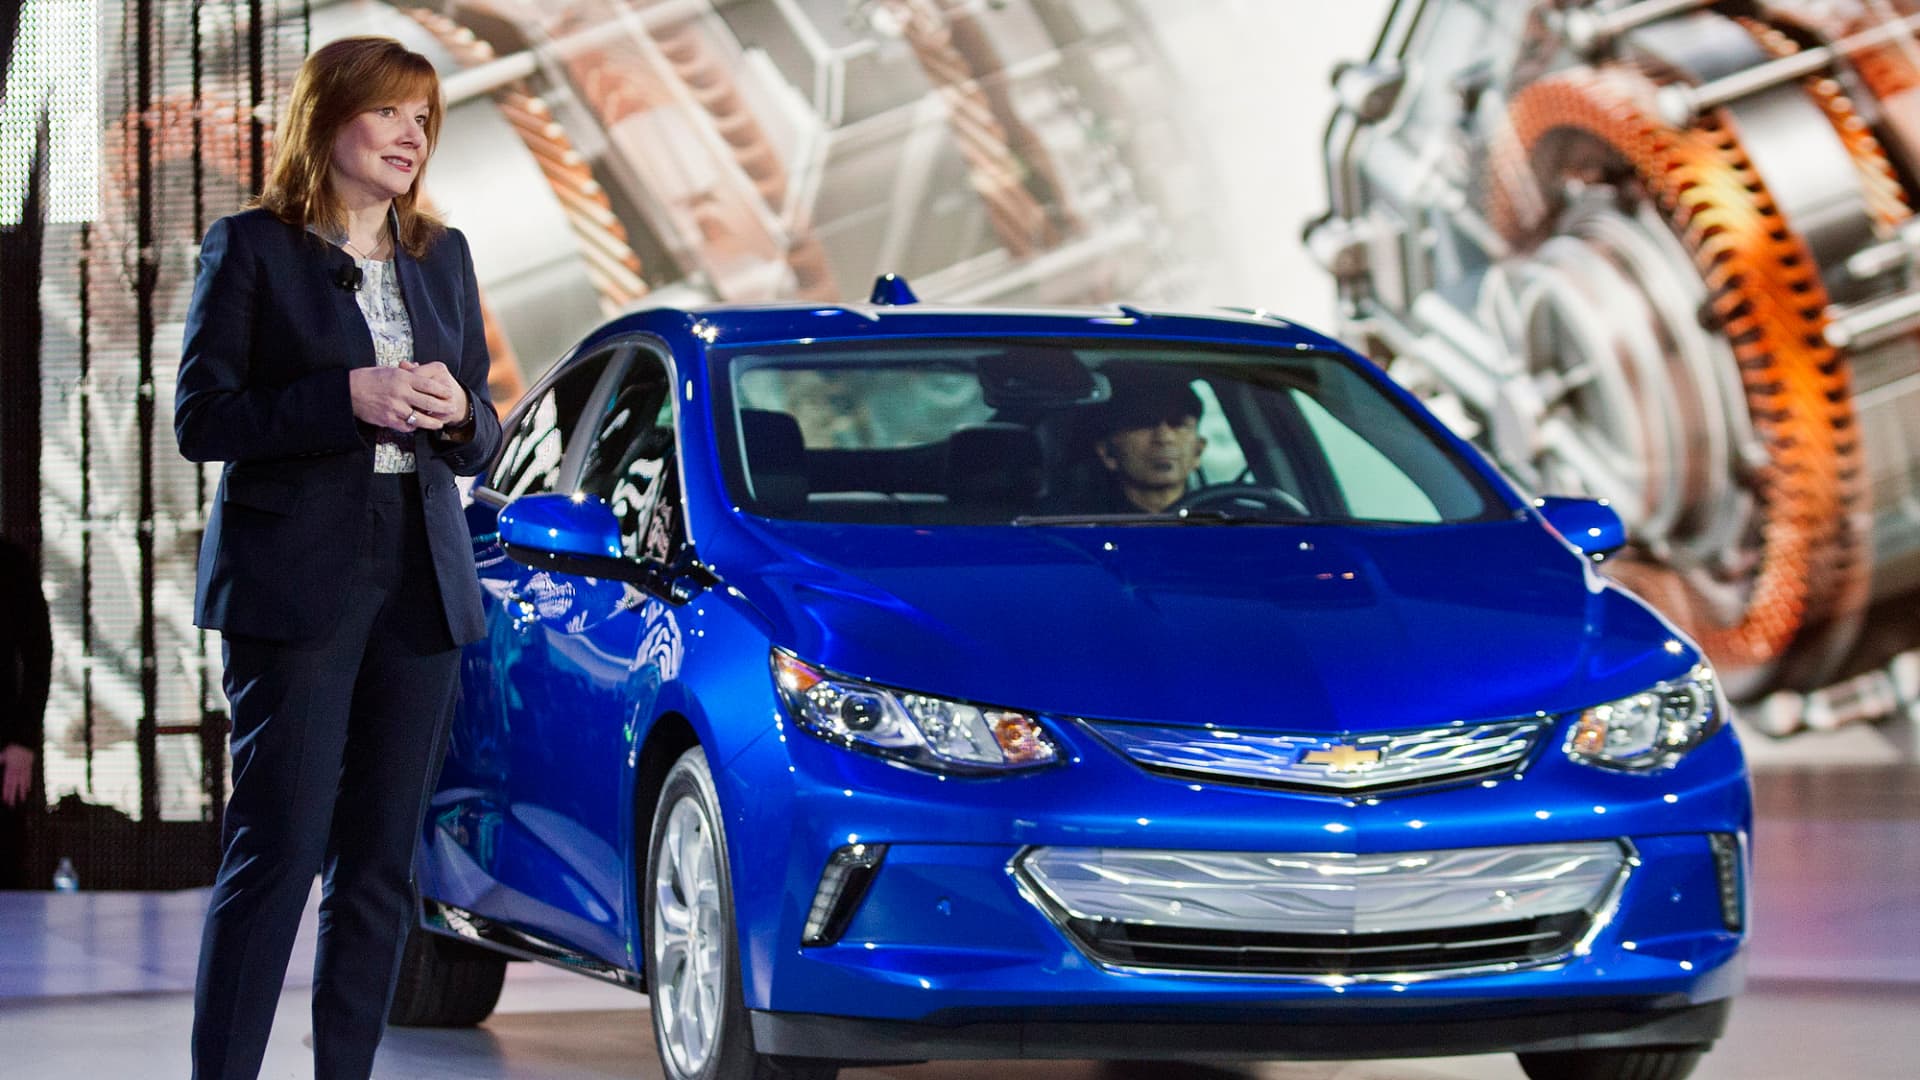 May the Chevy Volt RIP: Tesla helped kill it, but GM learned a lot